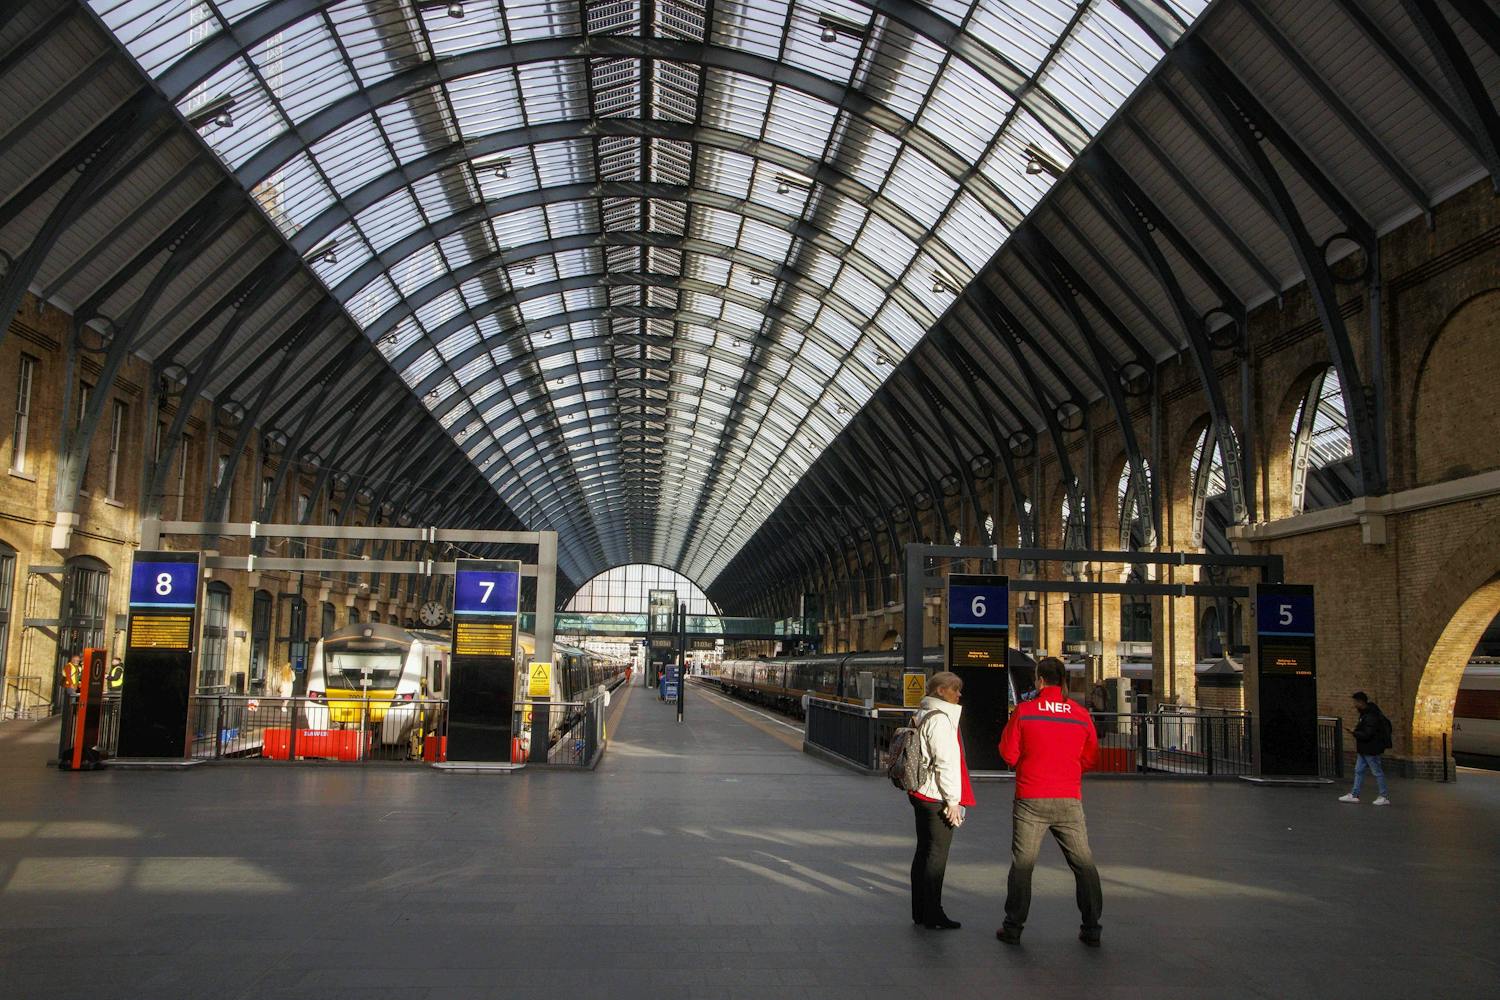 Rail traffic in the UK is still on strike, and an escalation is imminent